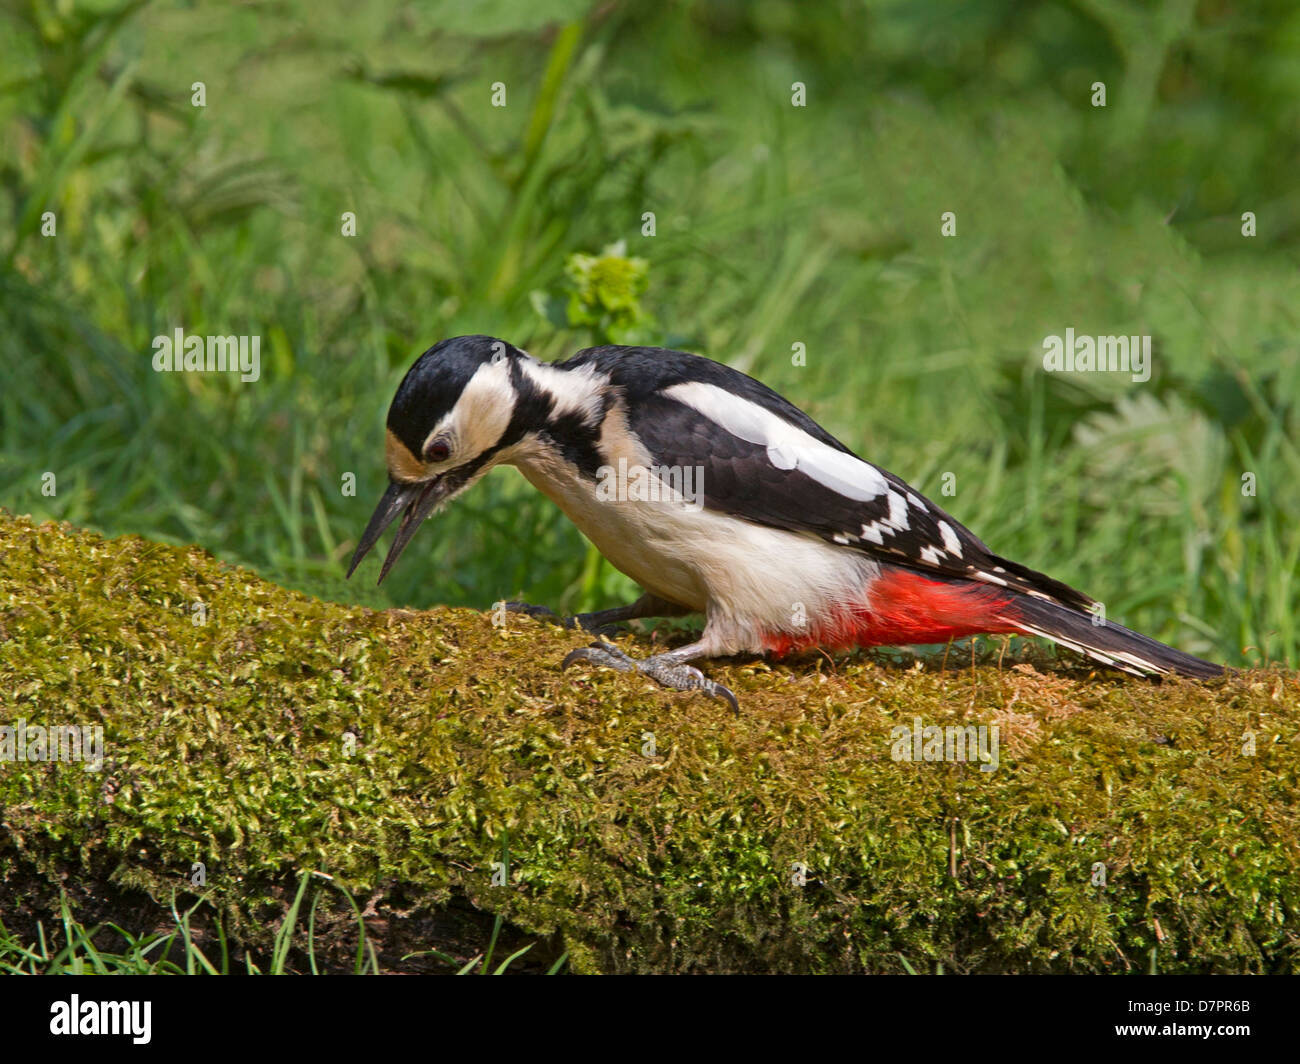 Great spotted woodpecker perched on log Stock Photo